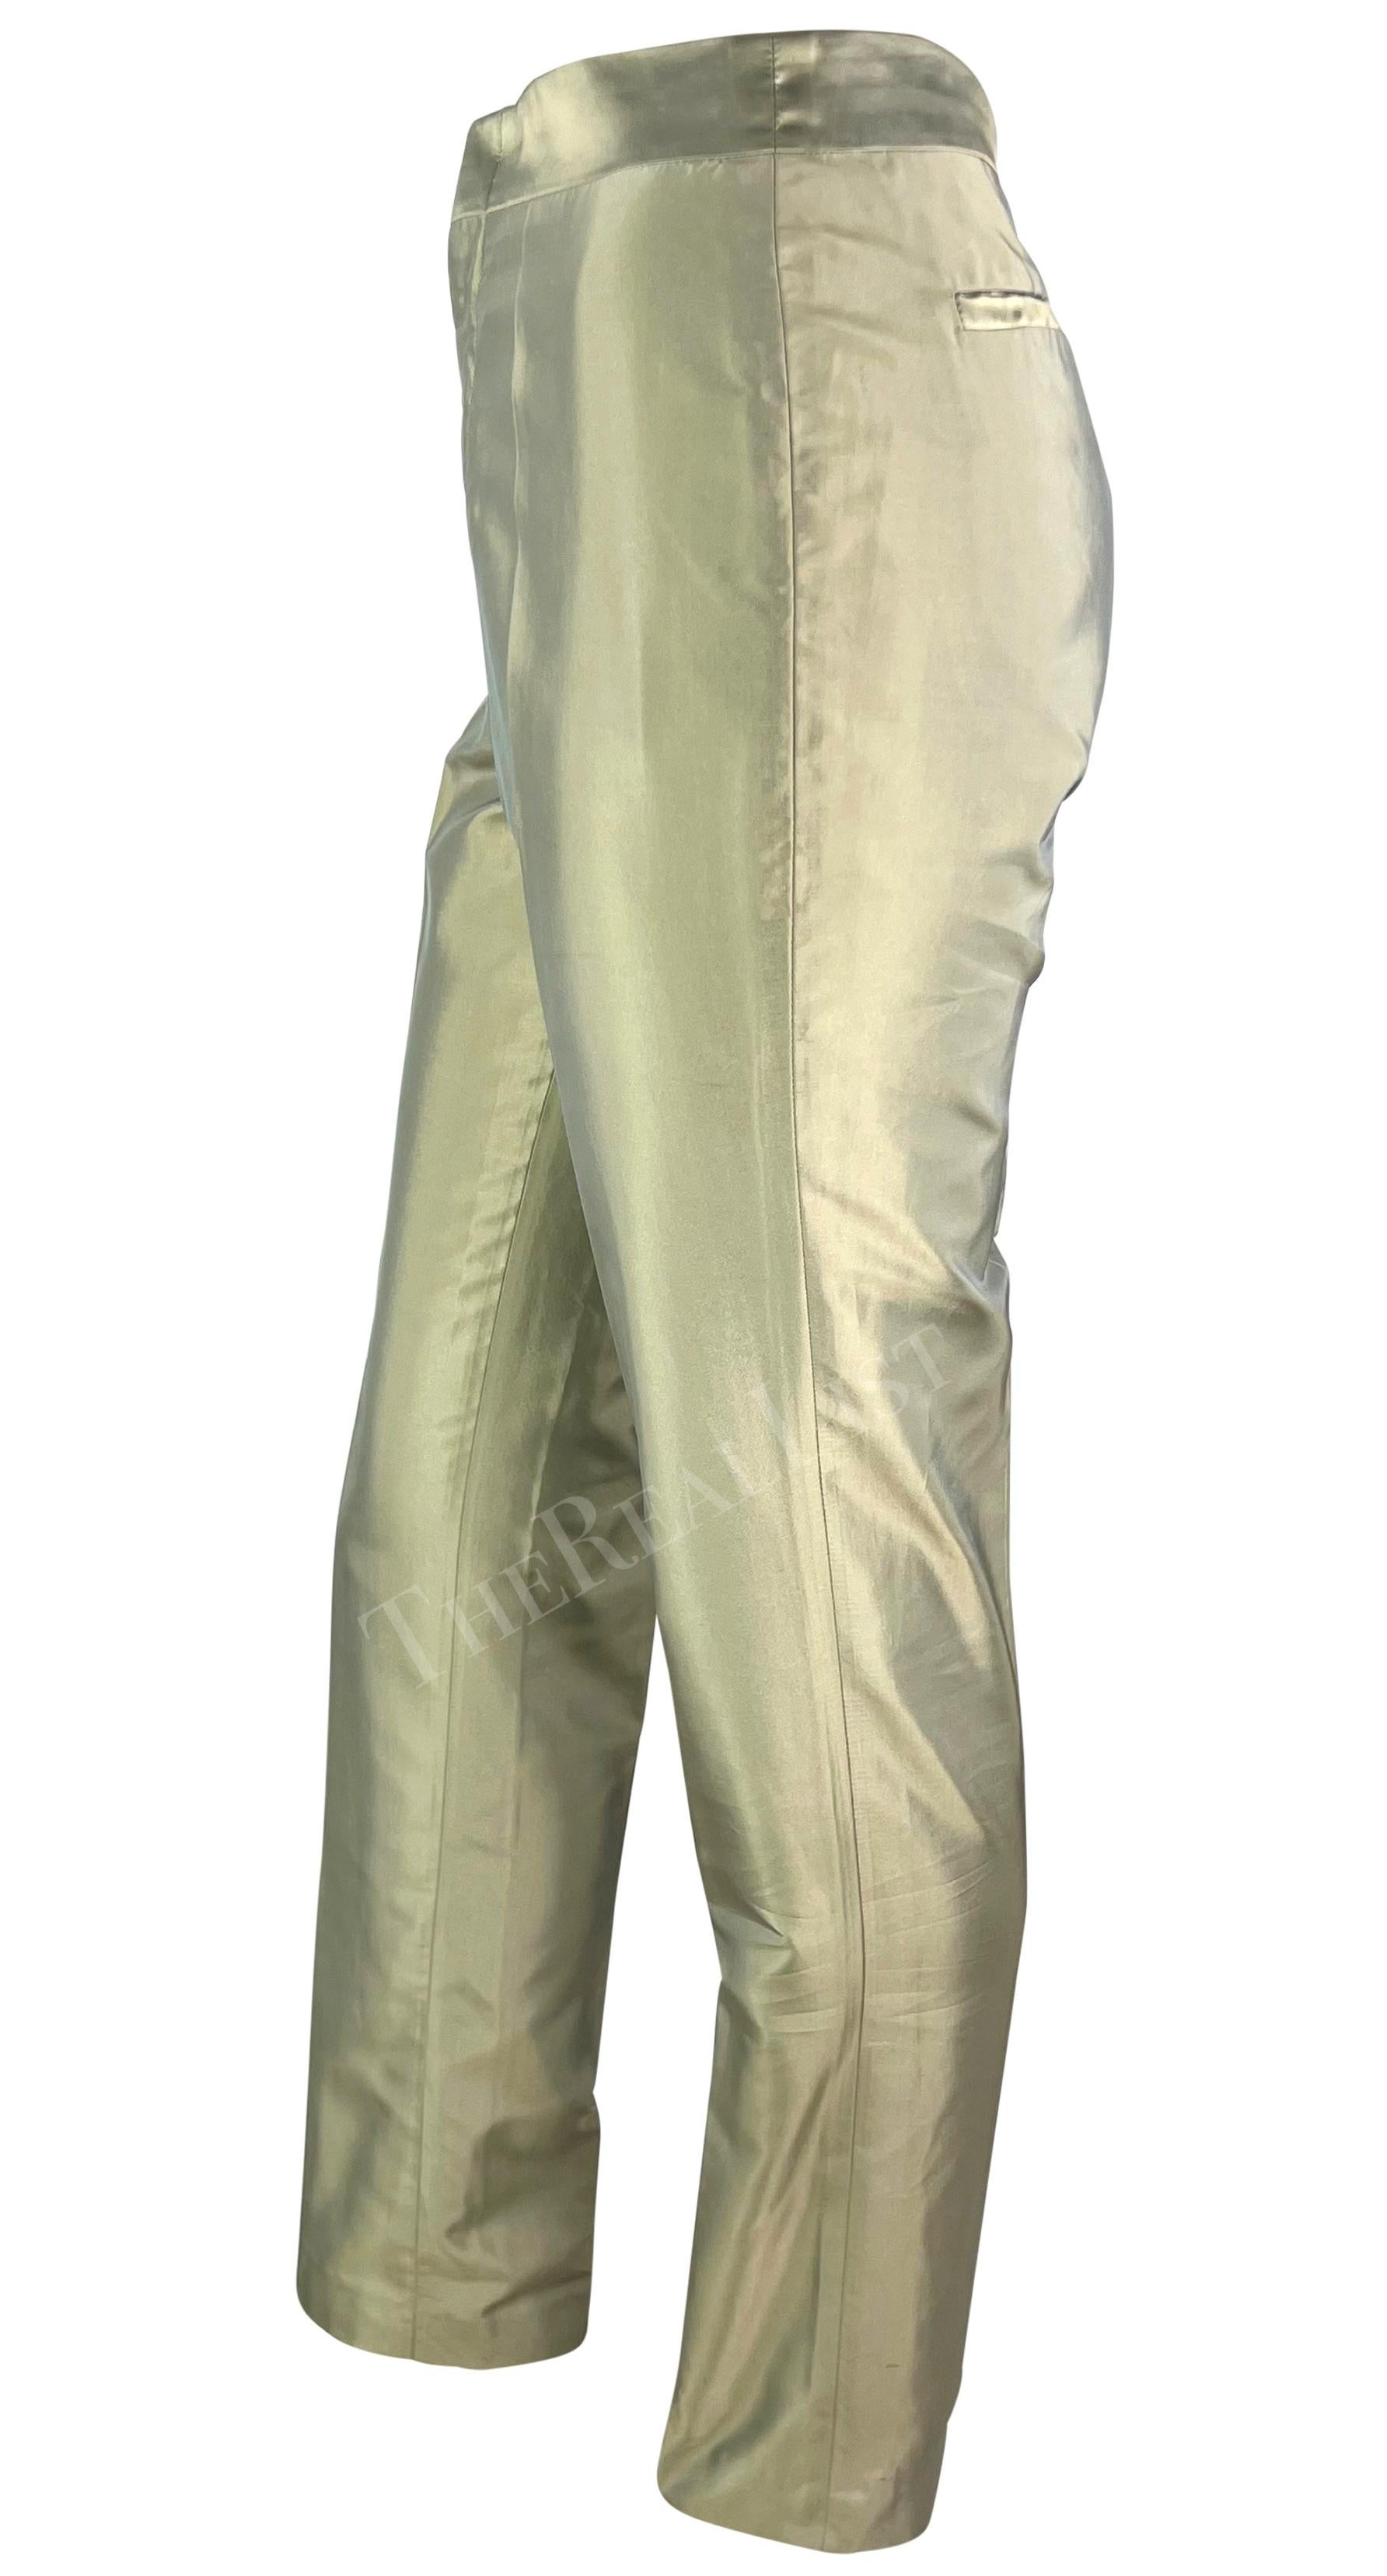 S/S 2000 Gucci by Tom Ford Light Green Iridescent Silk Straight Leg Pants In Excellent Condition For Sale In West Hollywood, CA